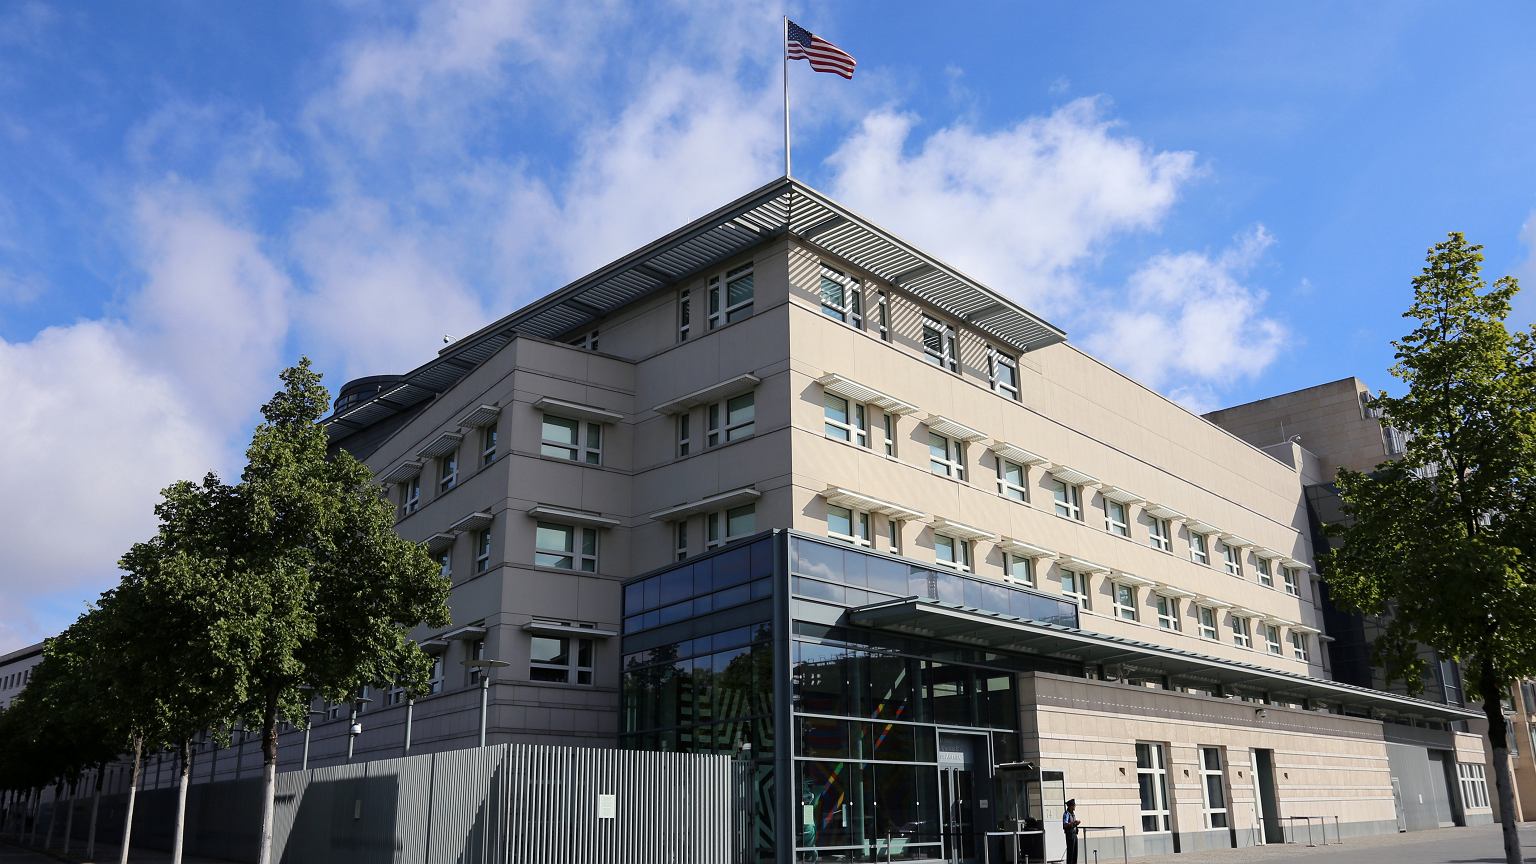 About the US Embassy in Vienna